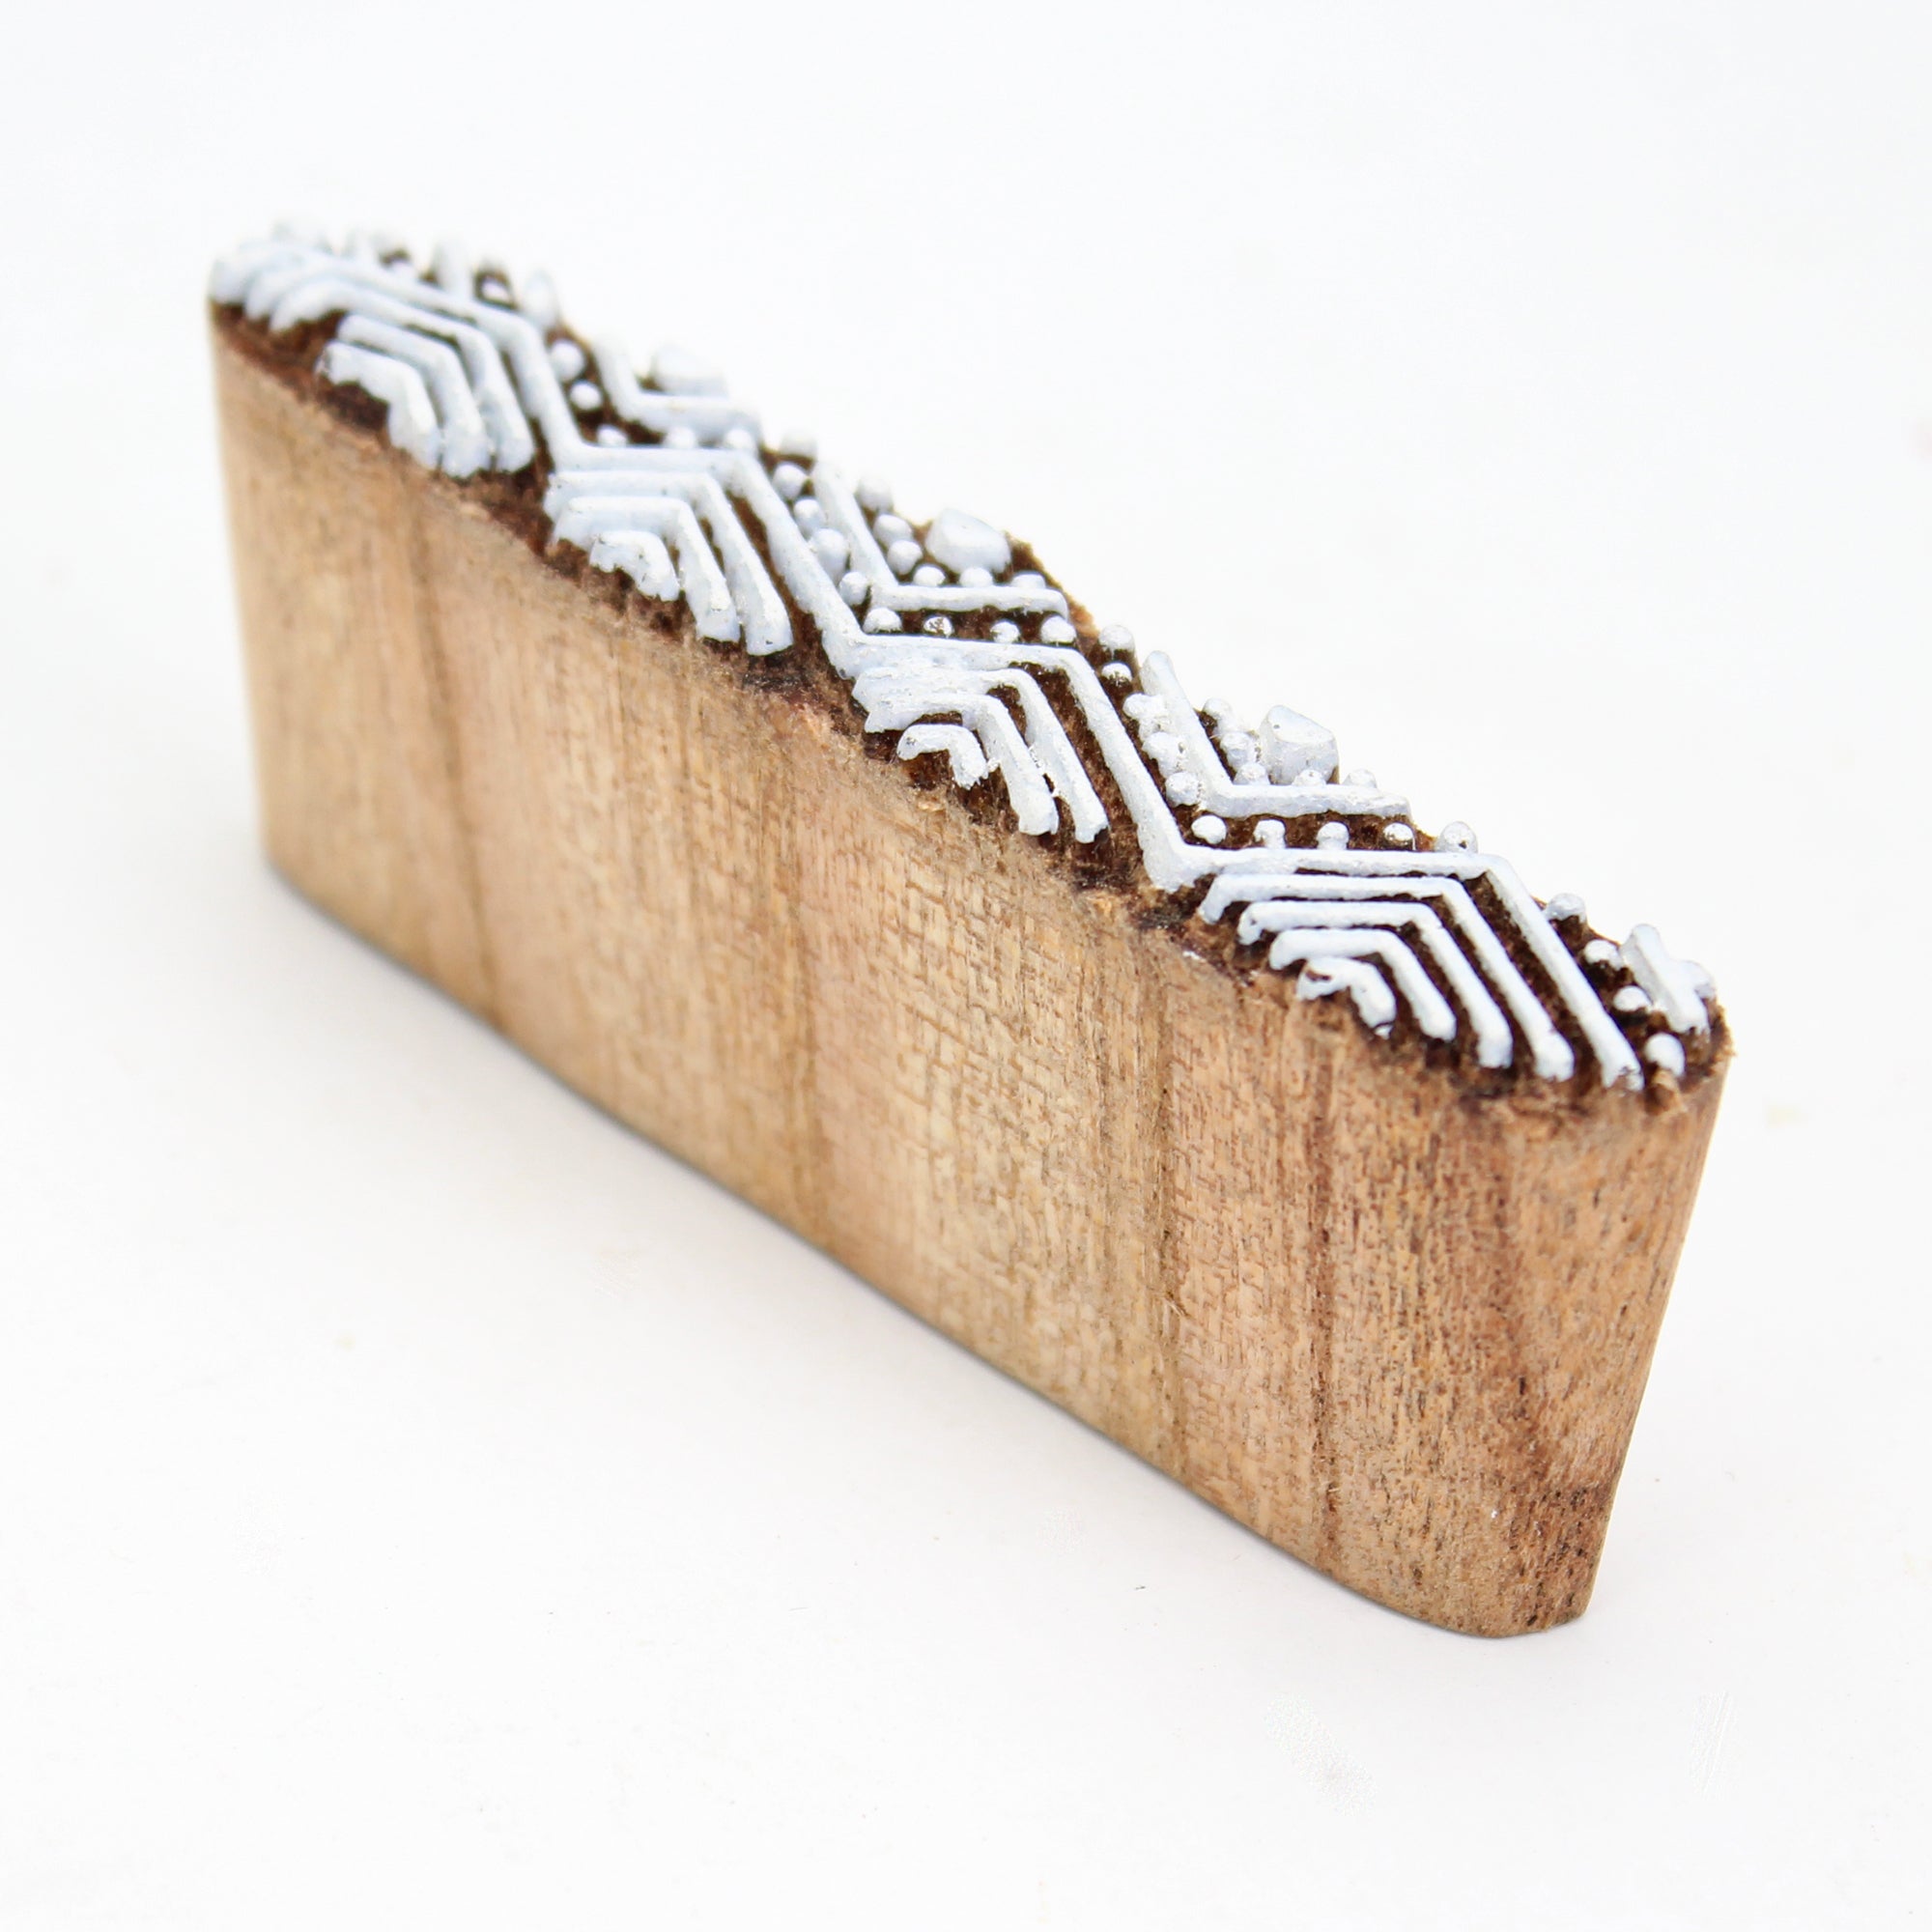 Hand Carved Wooden Printing Block Chevron Border W 0.5inch X L 2.5inch 1pc